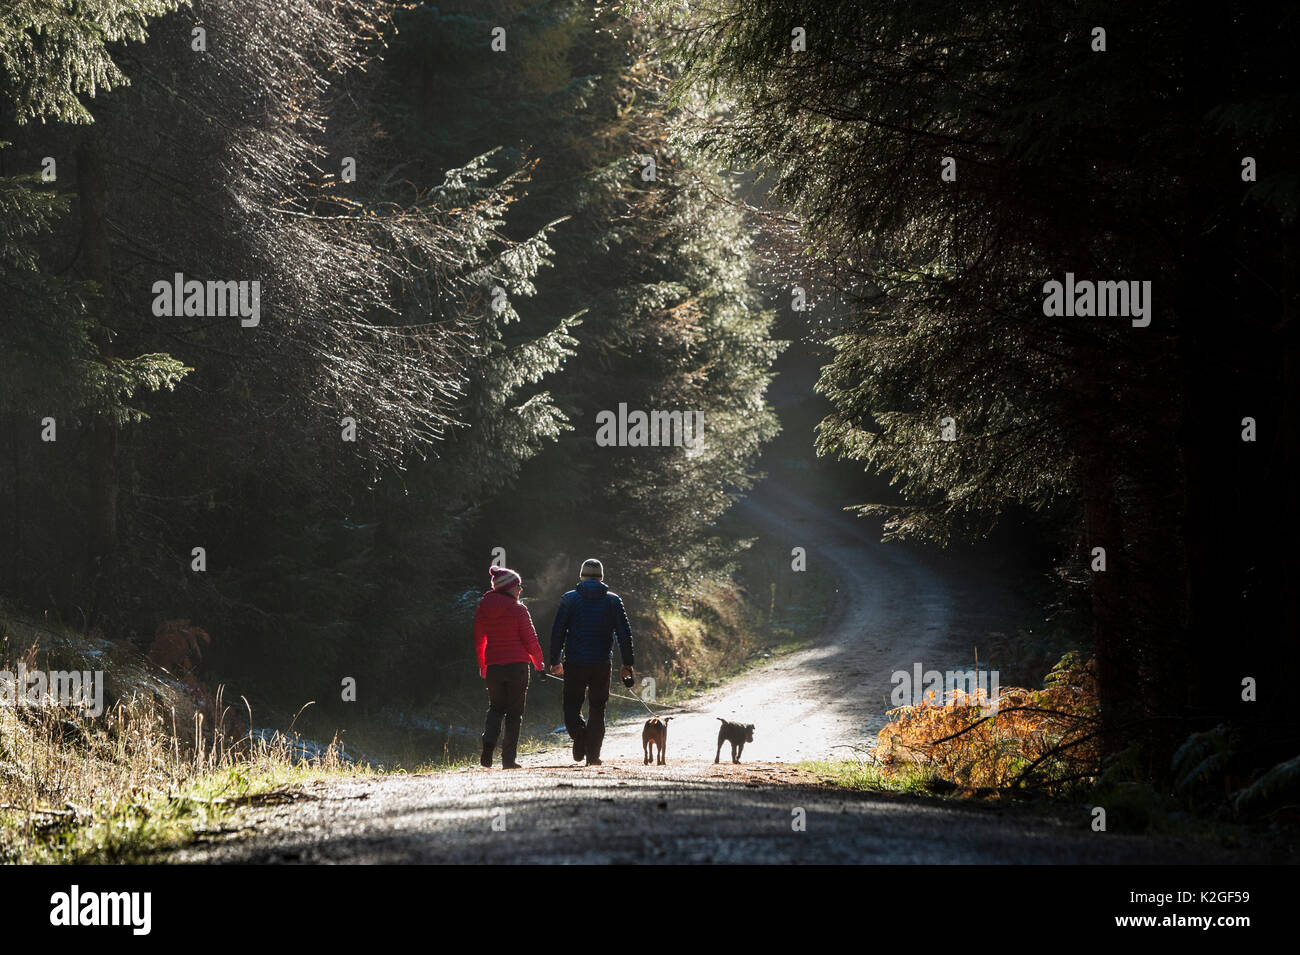 Walkers in Cardrona, Tweed Valley, Forestry Commission, Scotland, UK, November. Stock Photo